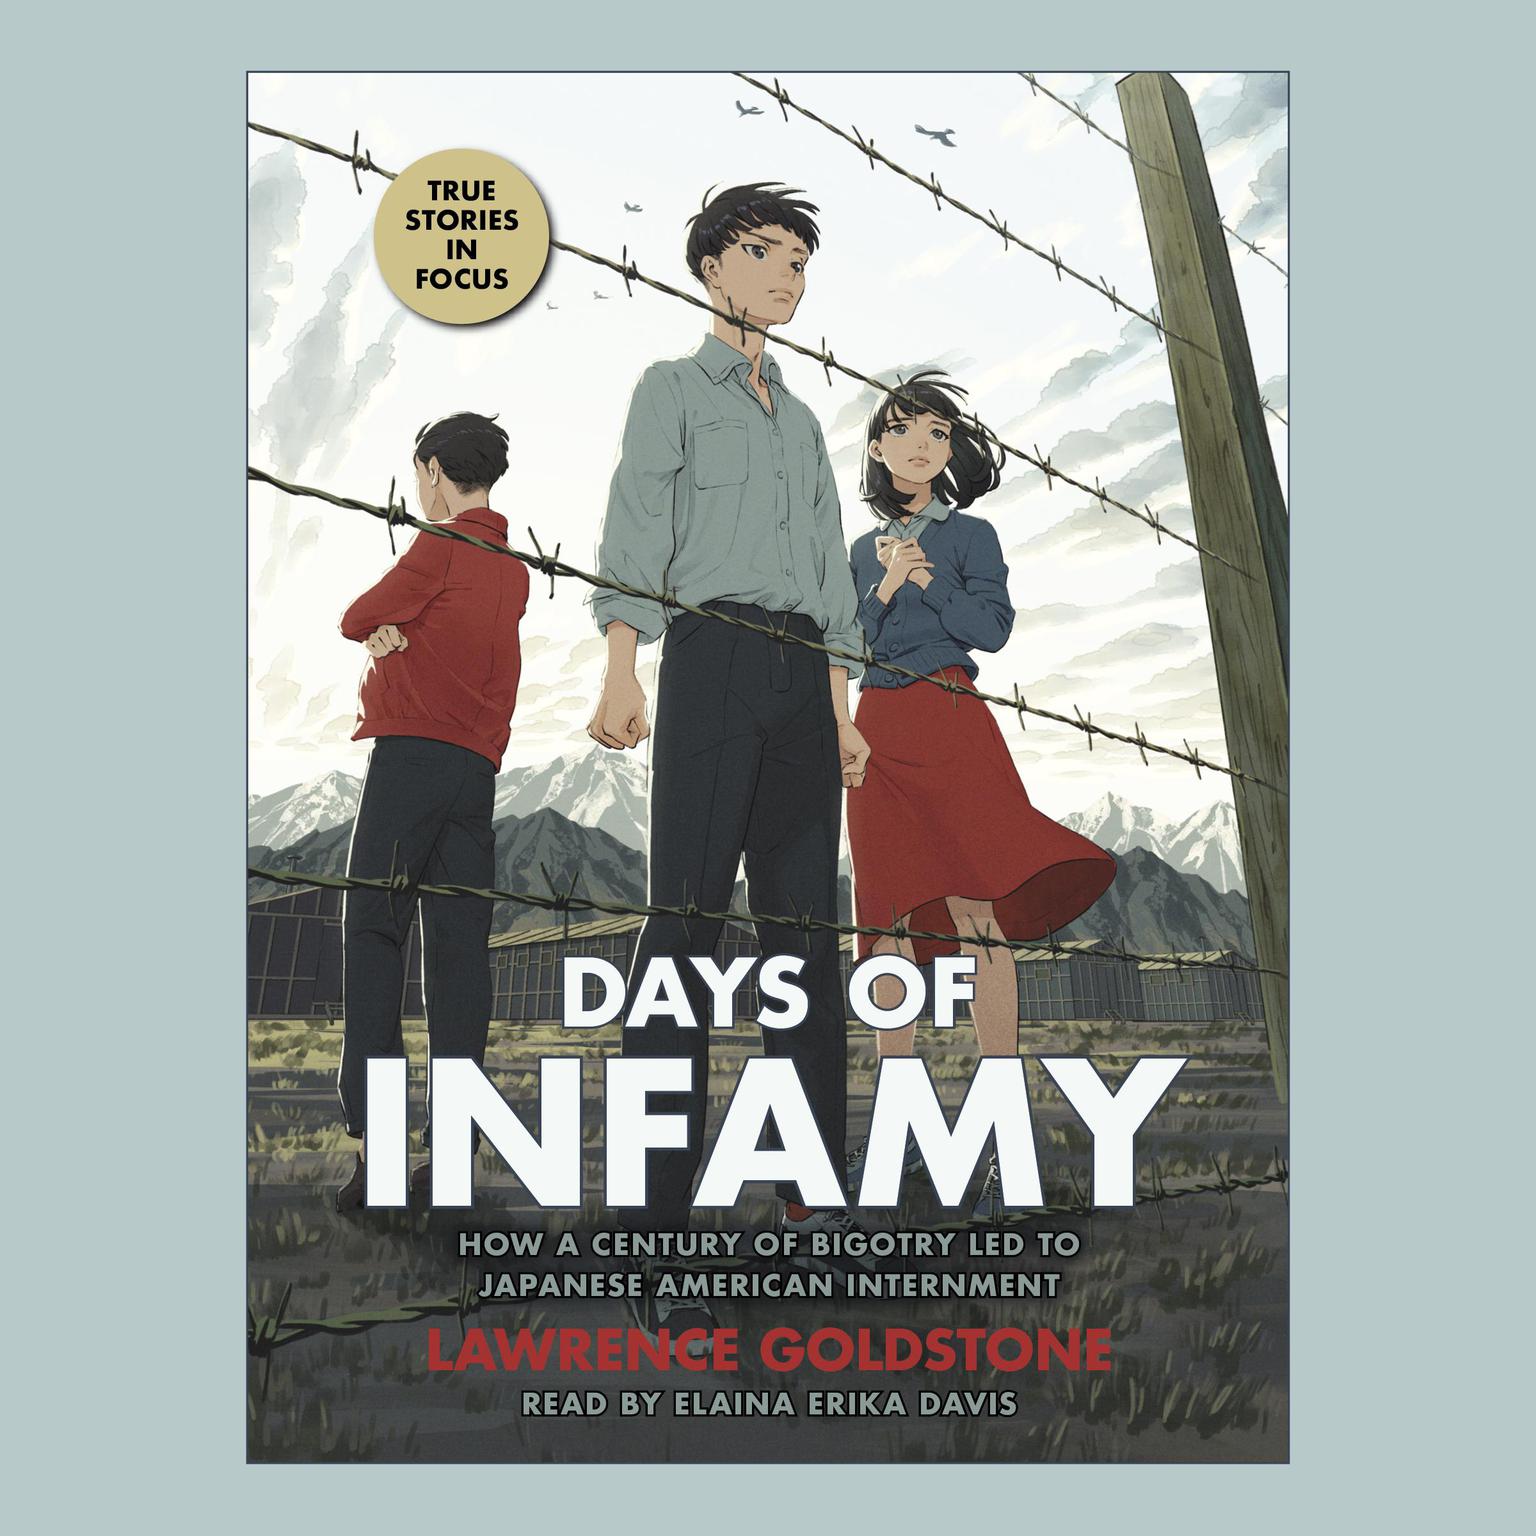 Days of Infamy: How a Century of Bigotry Led to Japanese American Internment (Scholastic Focus): How a Century of Bigotry Led to Japanese American Internment Audiobook, by Lawrence Goldstone